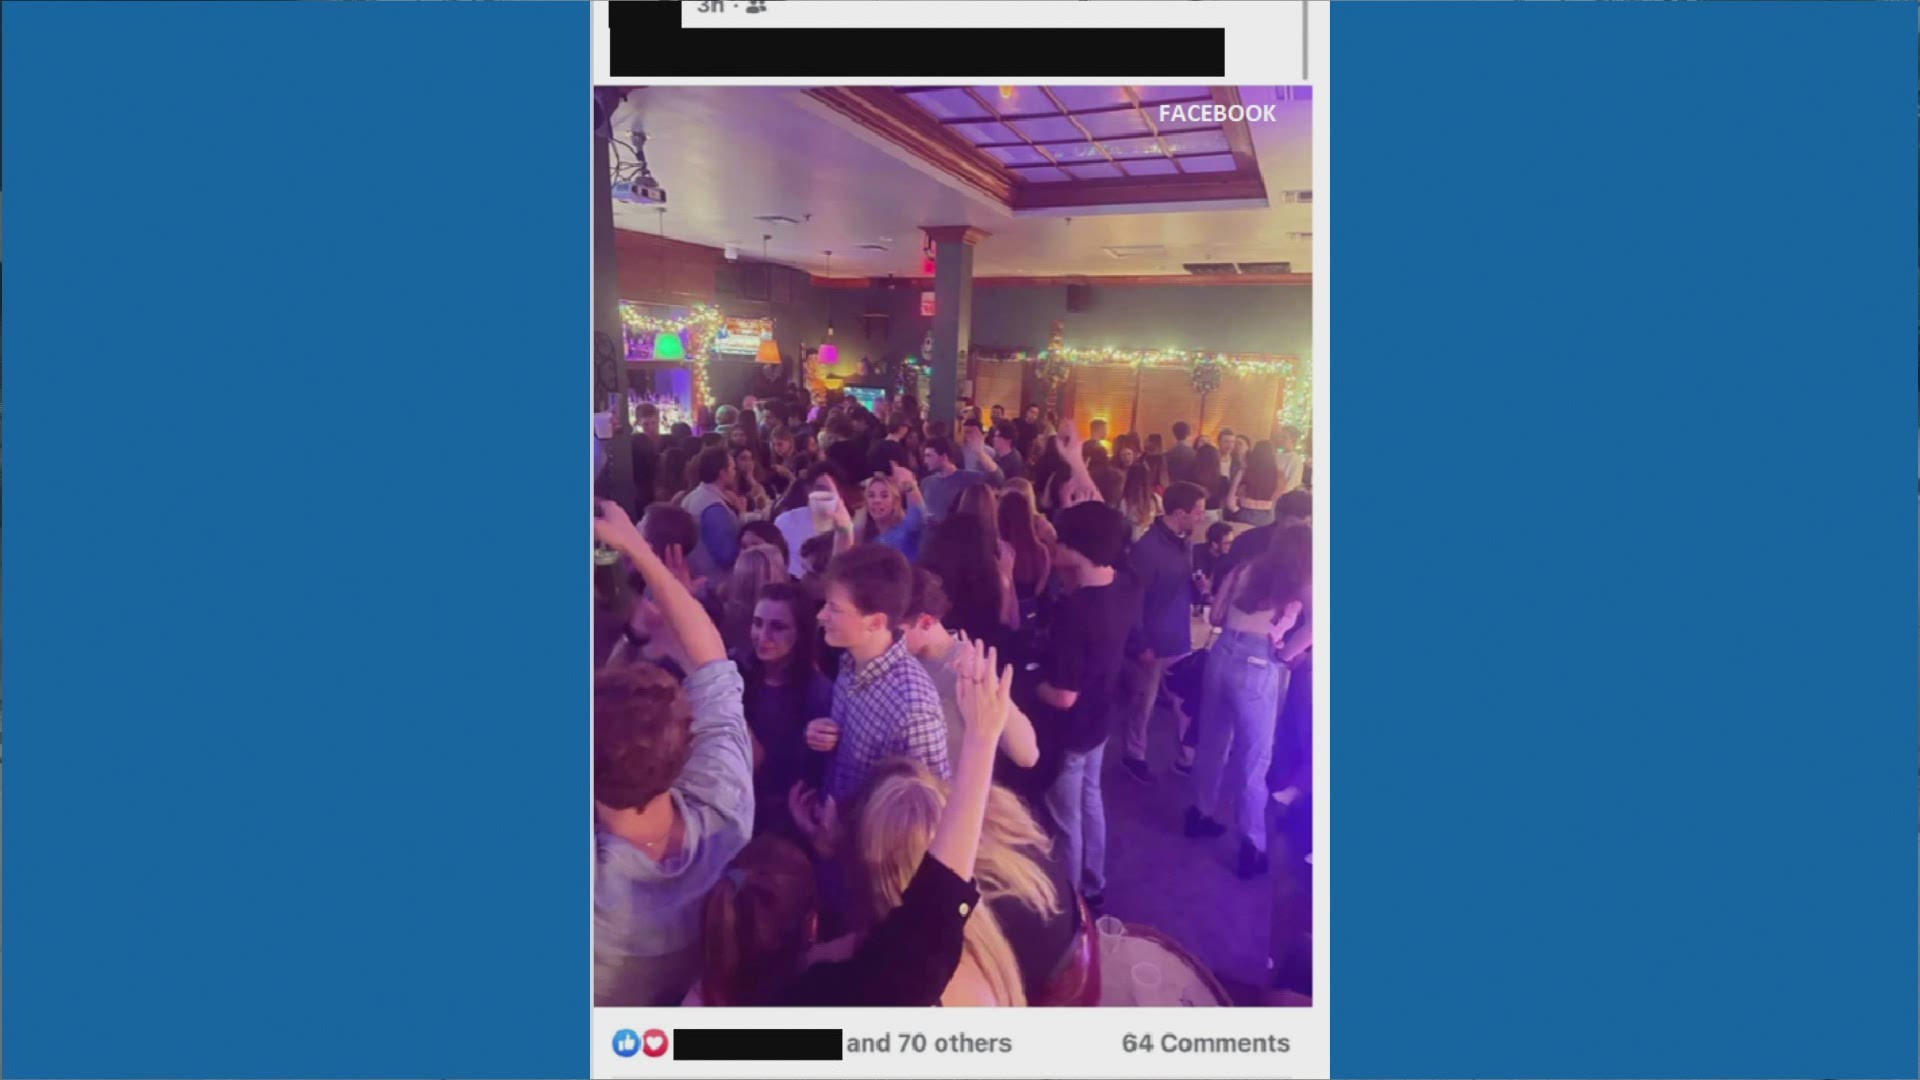 The photo shows a packed bar with no masks in sight.